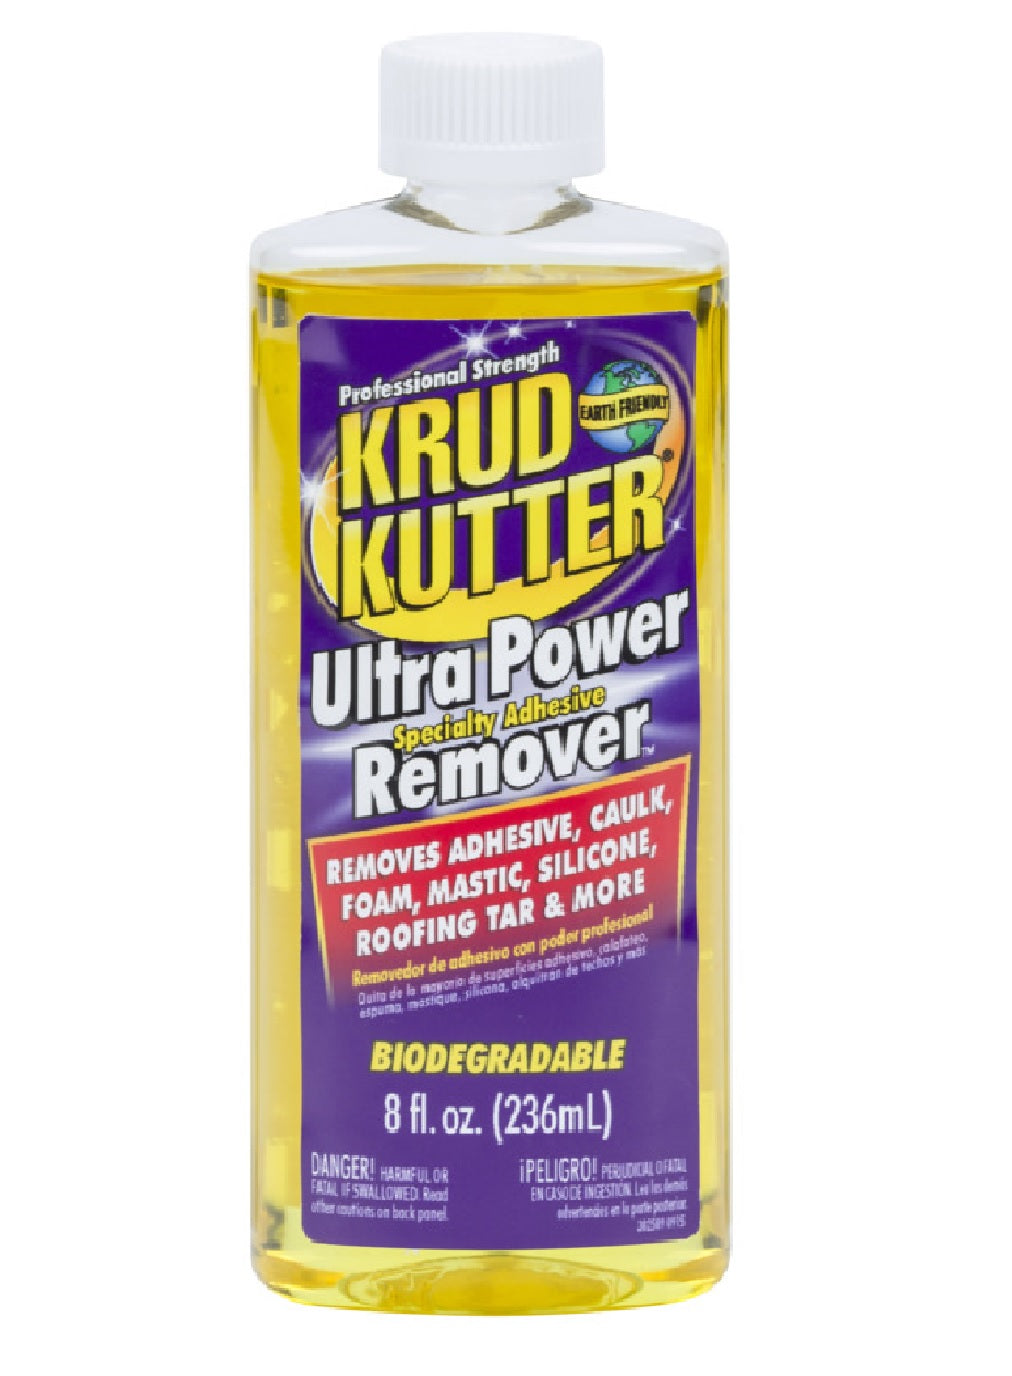 Krud Kutter 302805 Ultra Power Specialty Adhesive Remover, 8 Ounce